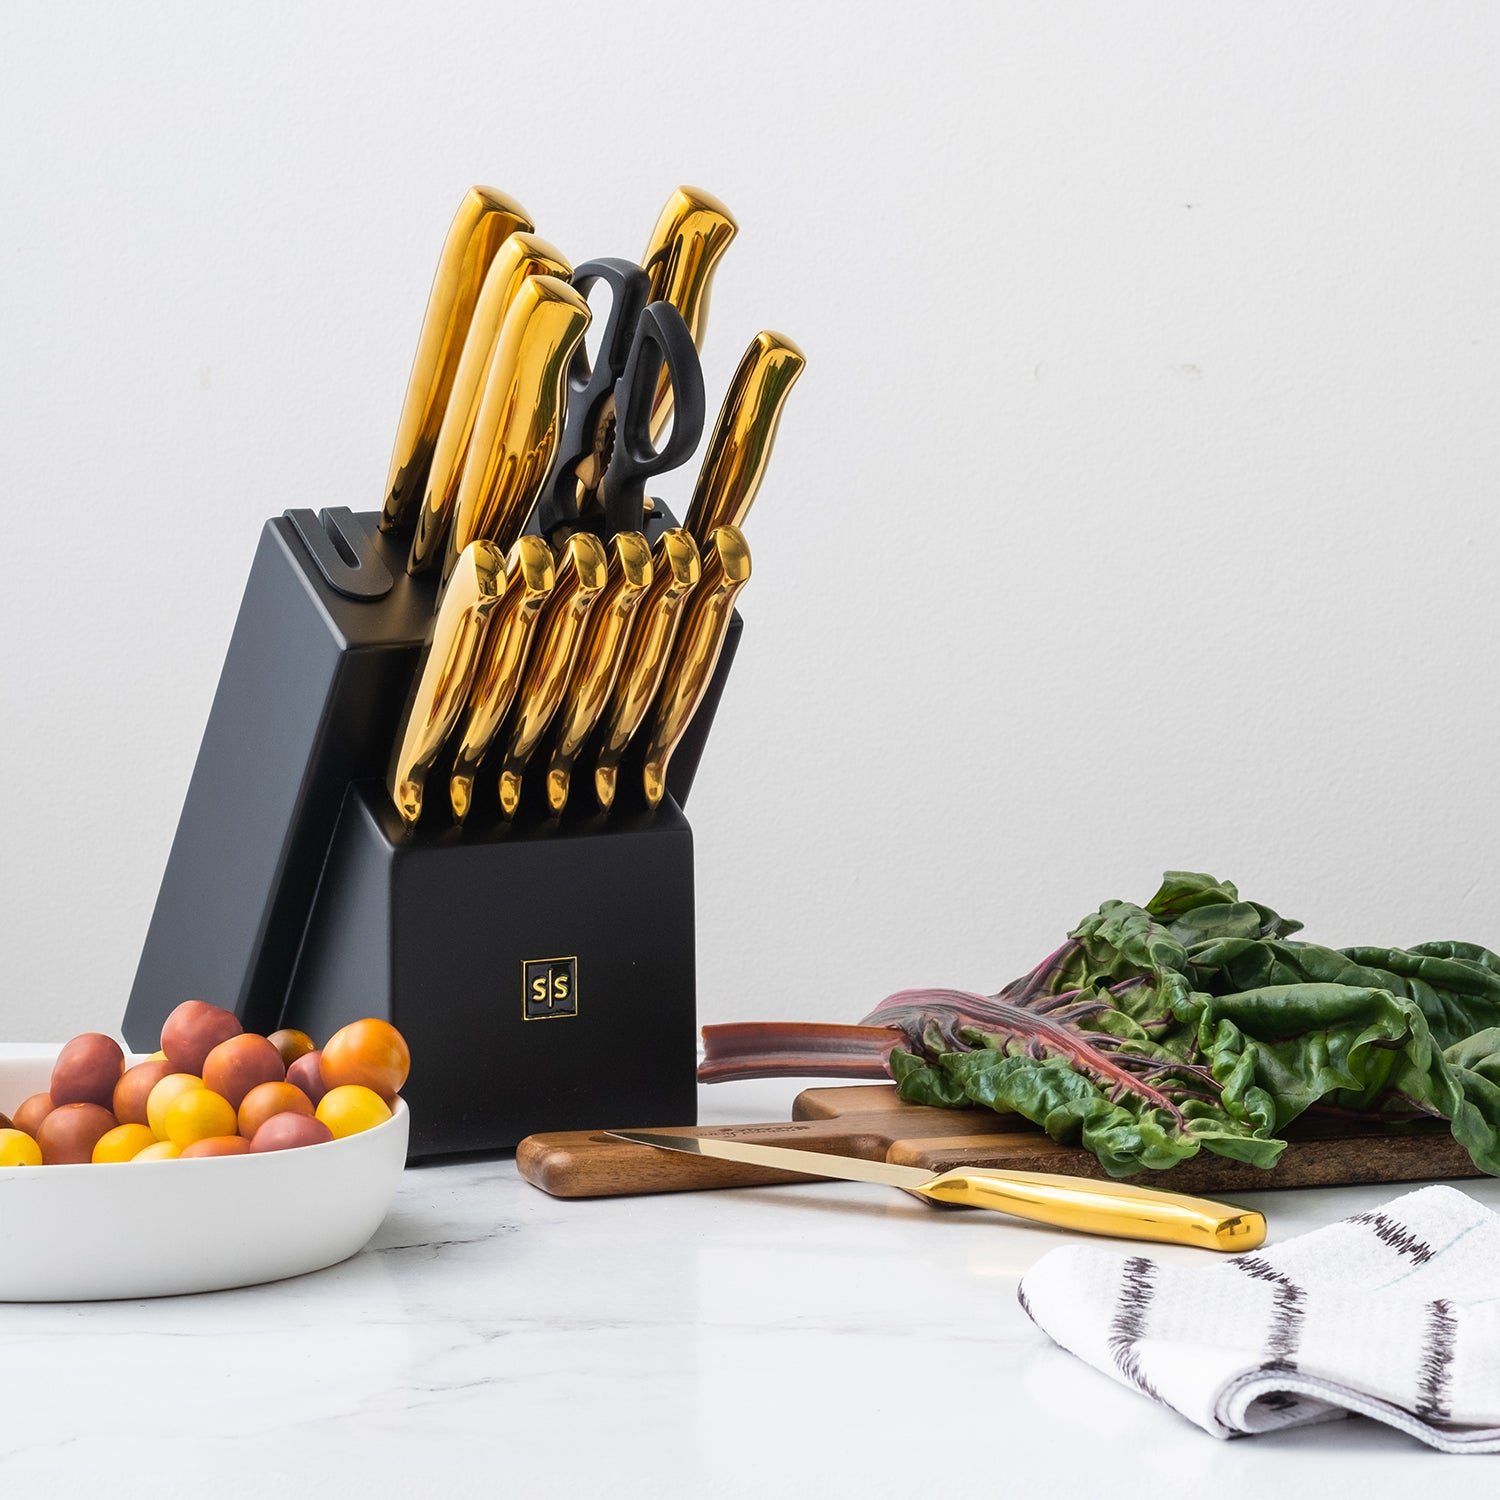 Black and Gold Knife Set with Block - Gold Handle Knife Set with Self Sharpening Kitchen Knife Holder - Black and Gold Kitchen Accessories